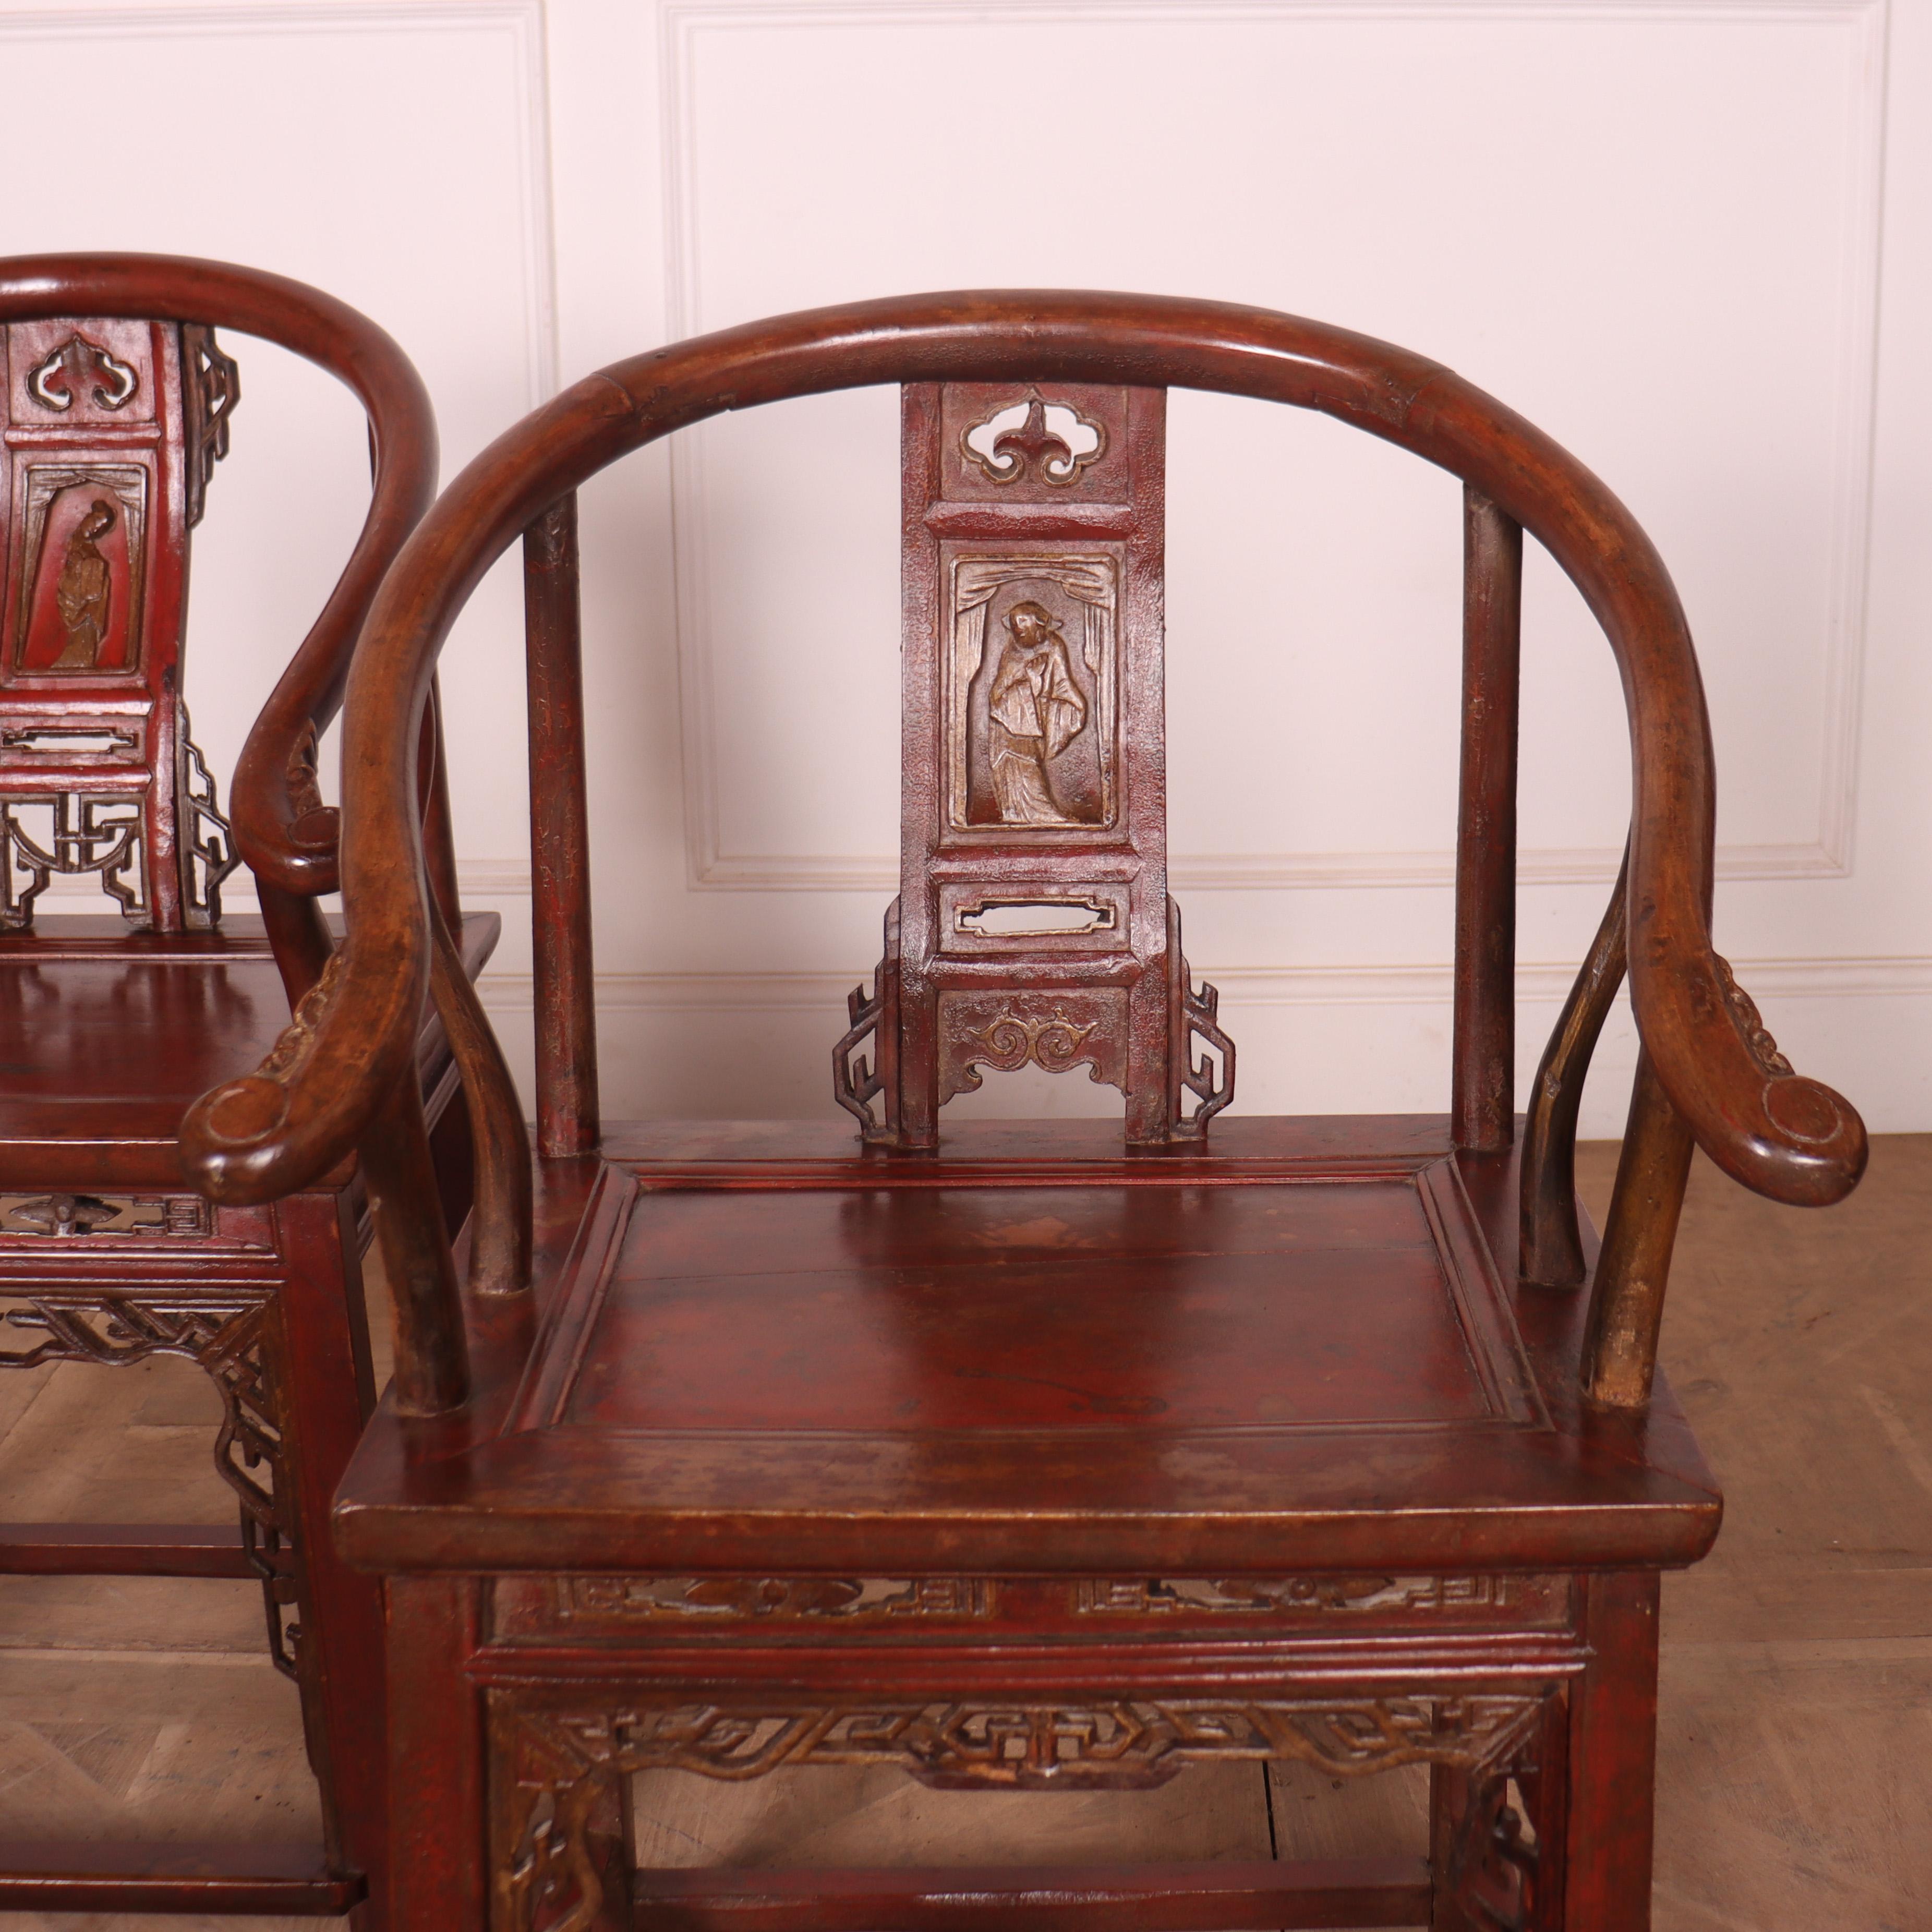 Near pair of 19th century Chinese elm armcharis with original paint finish. 1890

Seat height - 19.5